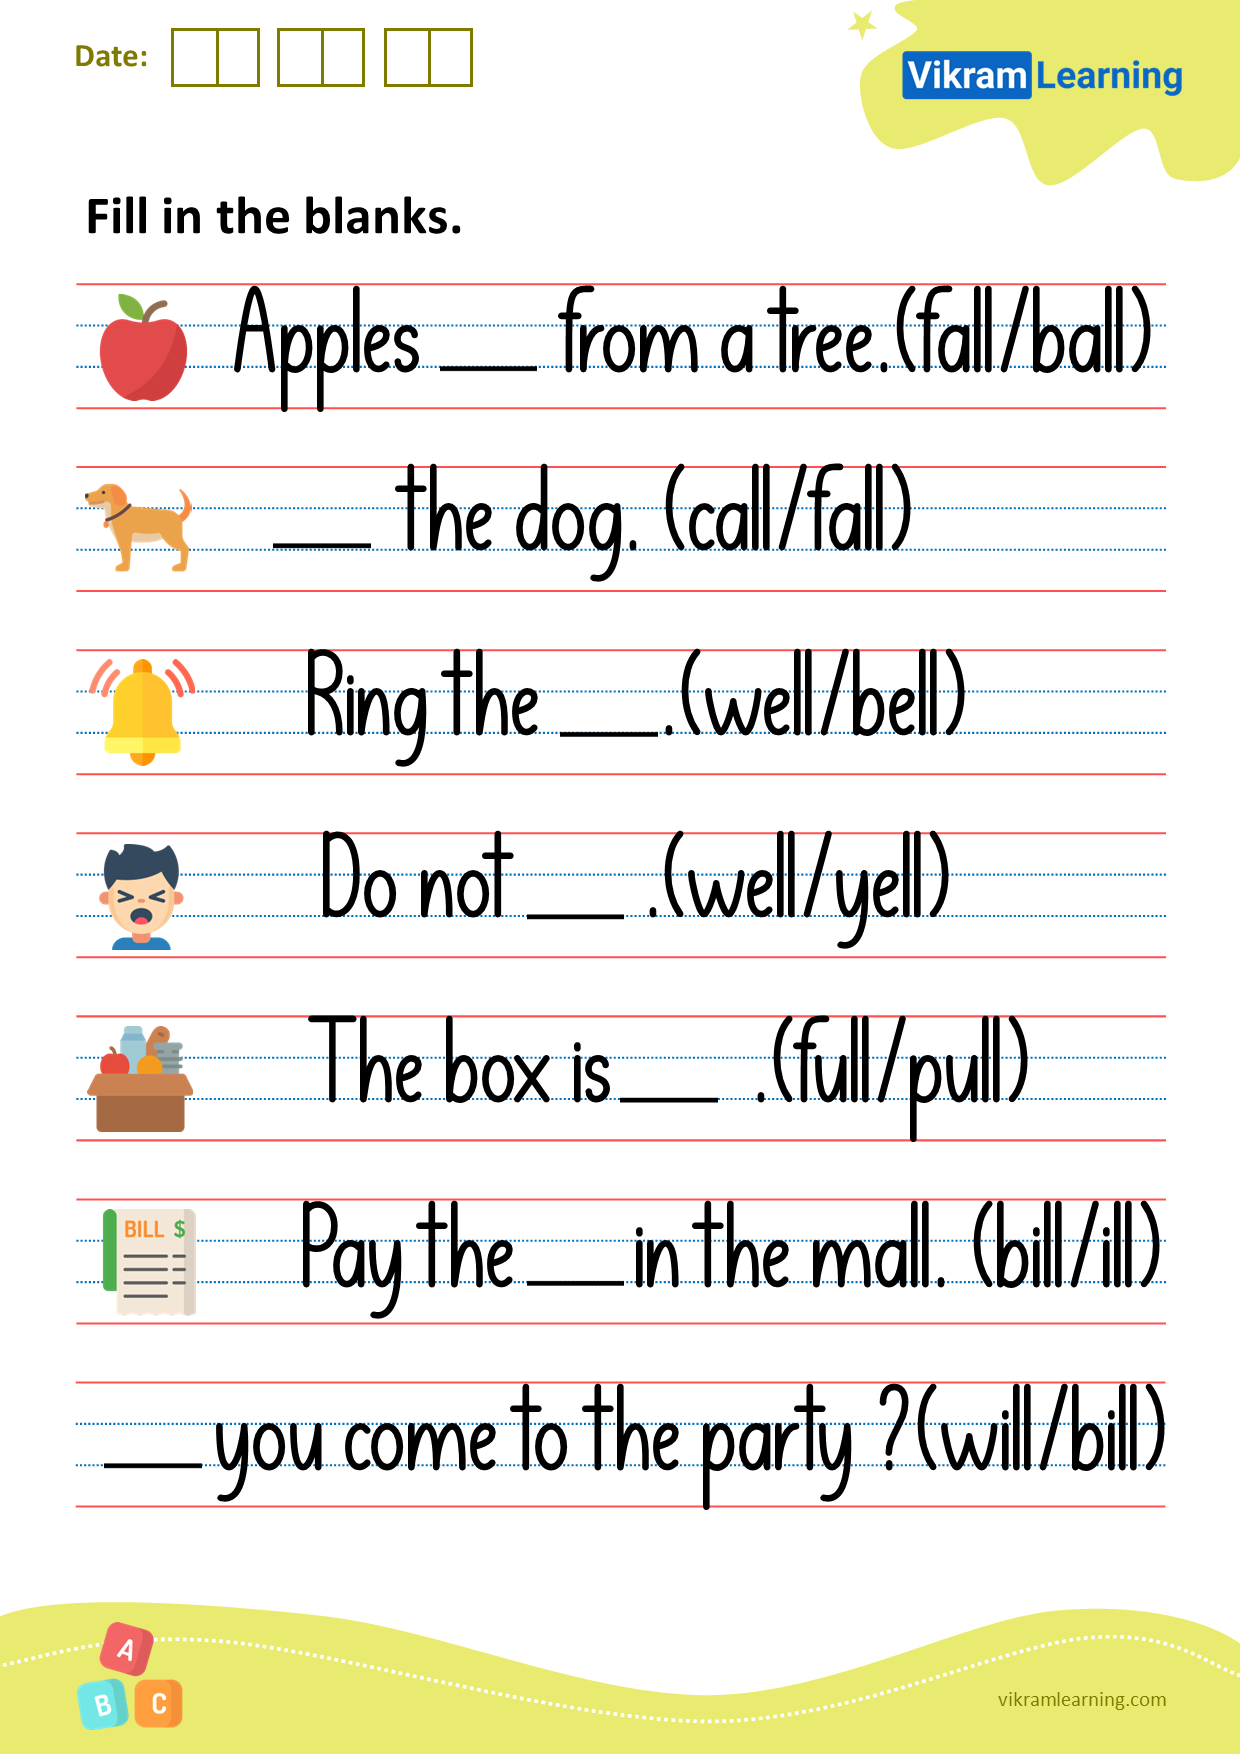 Download fill in the blanks worksheets